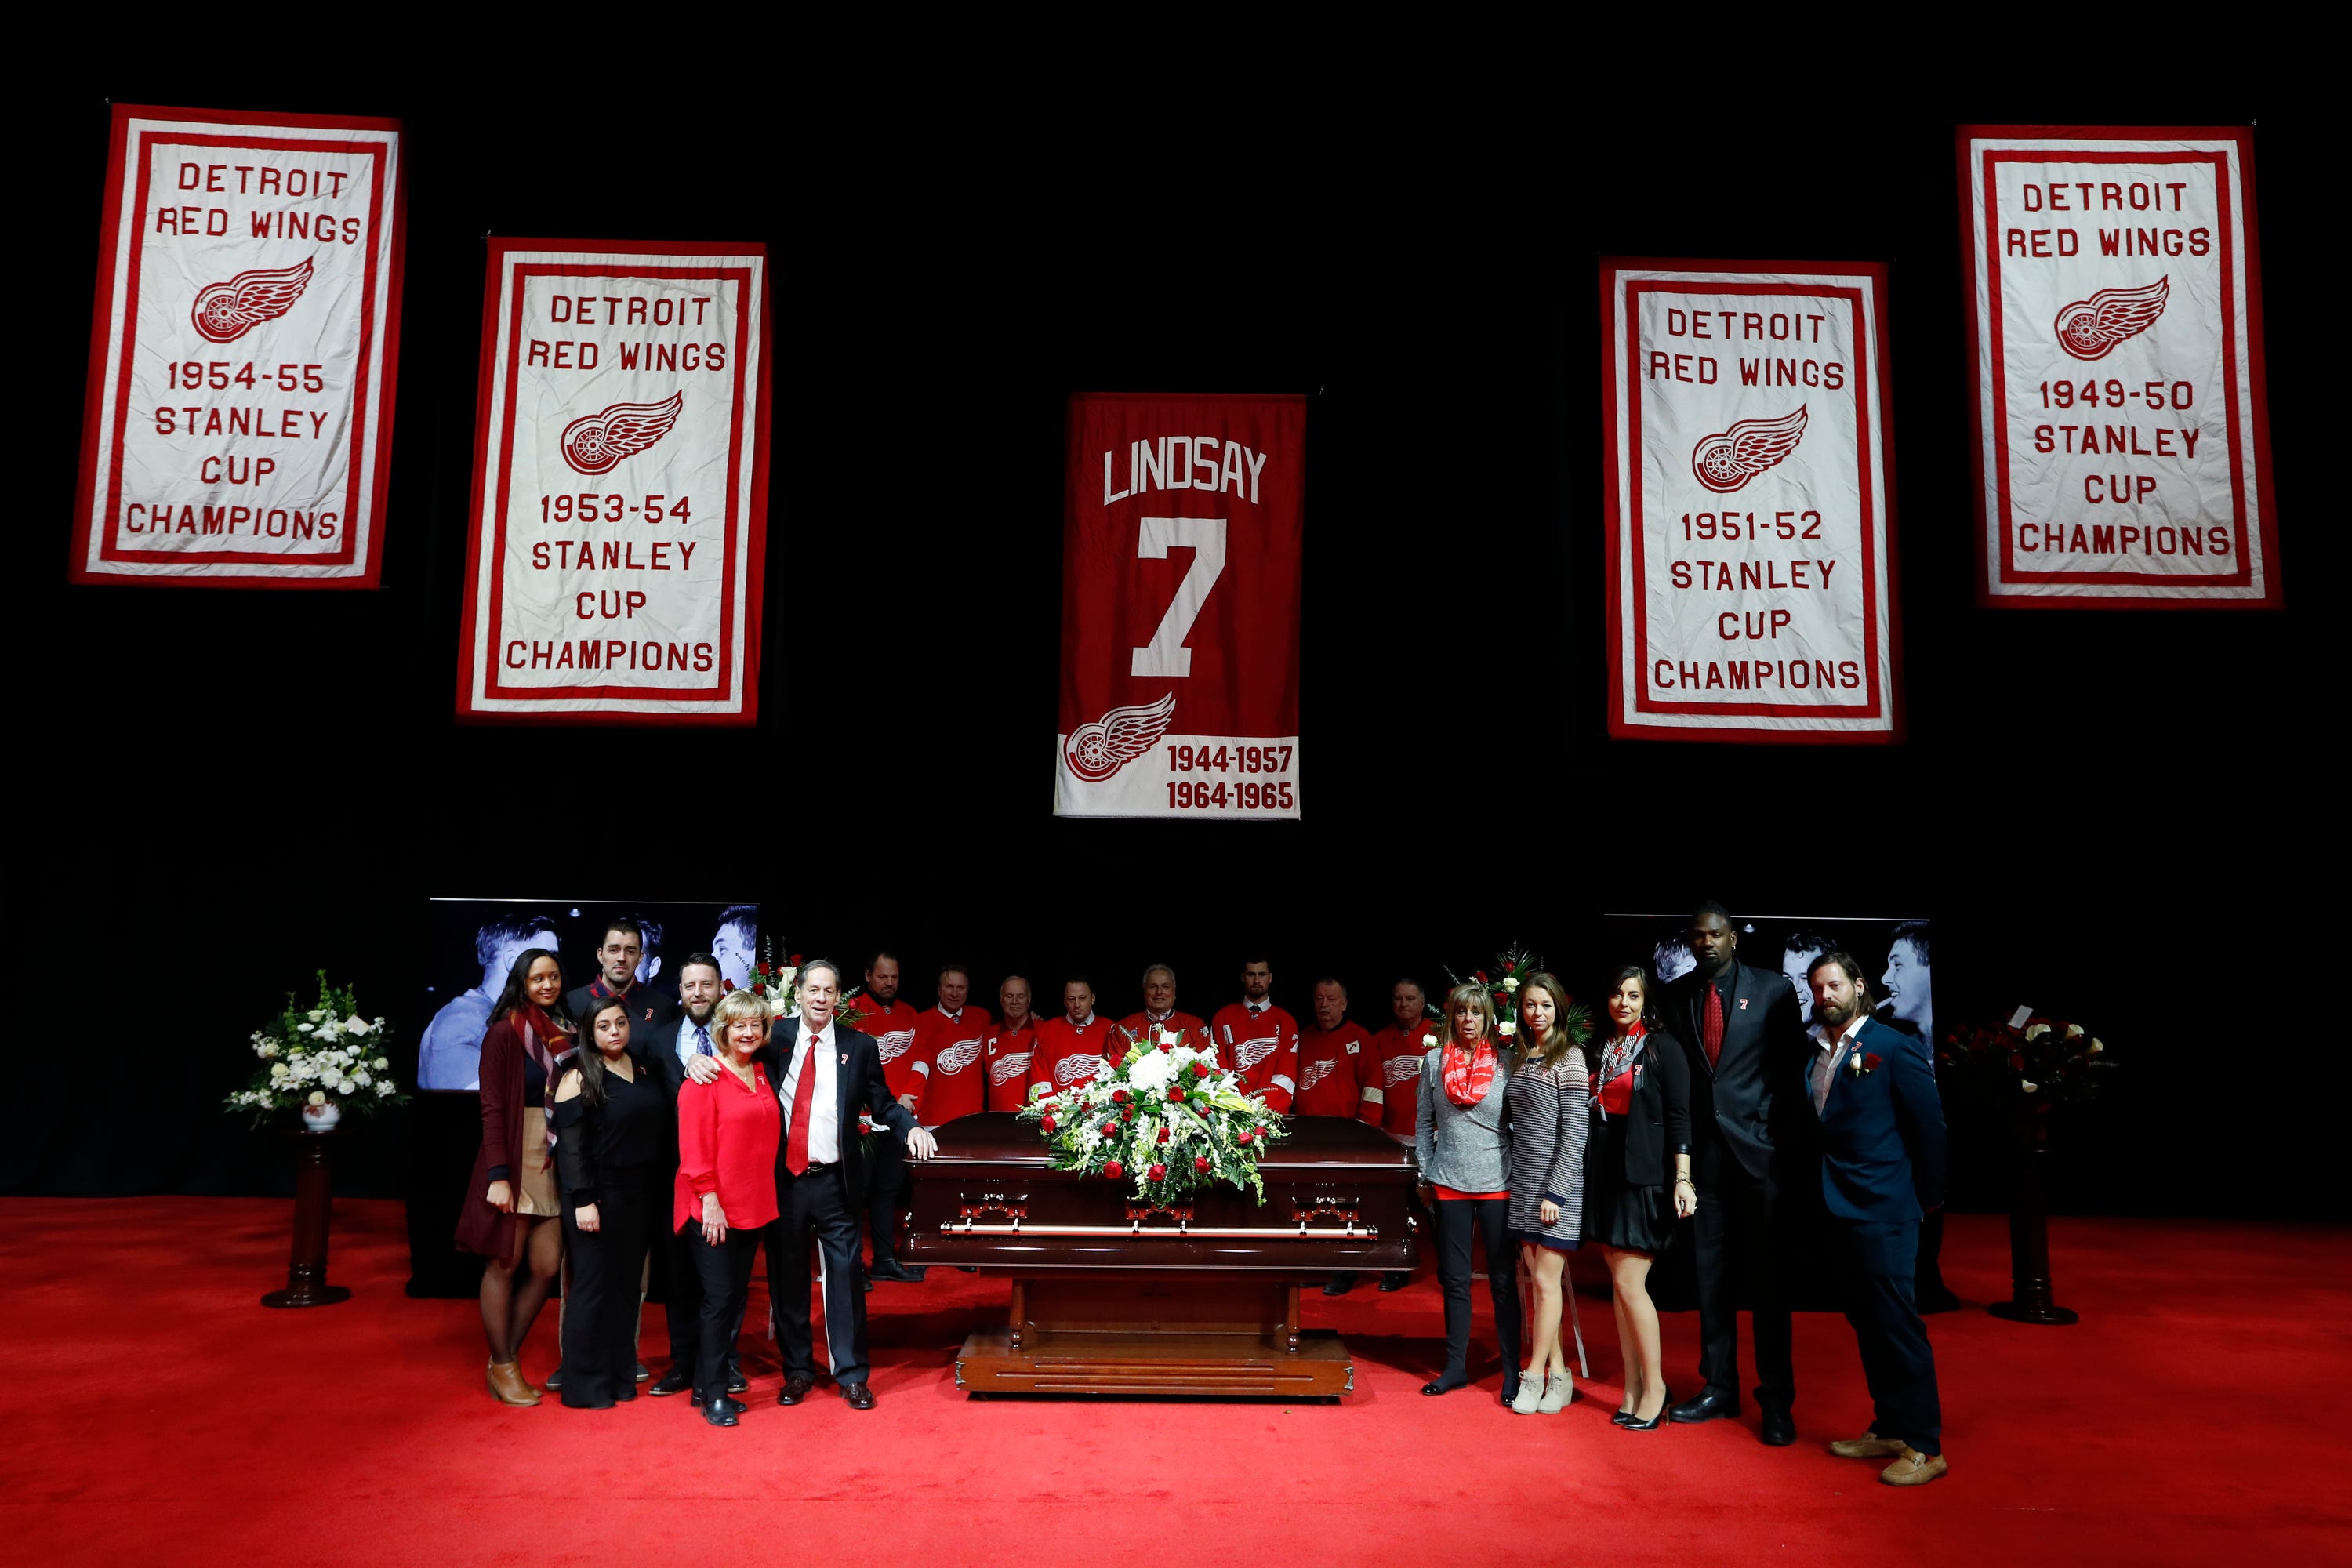 Family members pose with the casket of former Red Wing Ted Lindsay, with pallbearers behind it,  before the  public viewing. Lindsay's retired number hangs above.